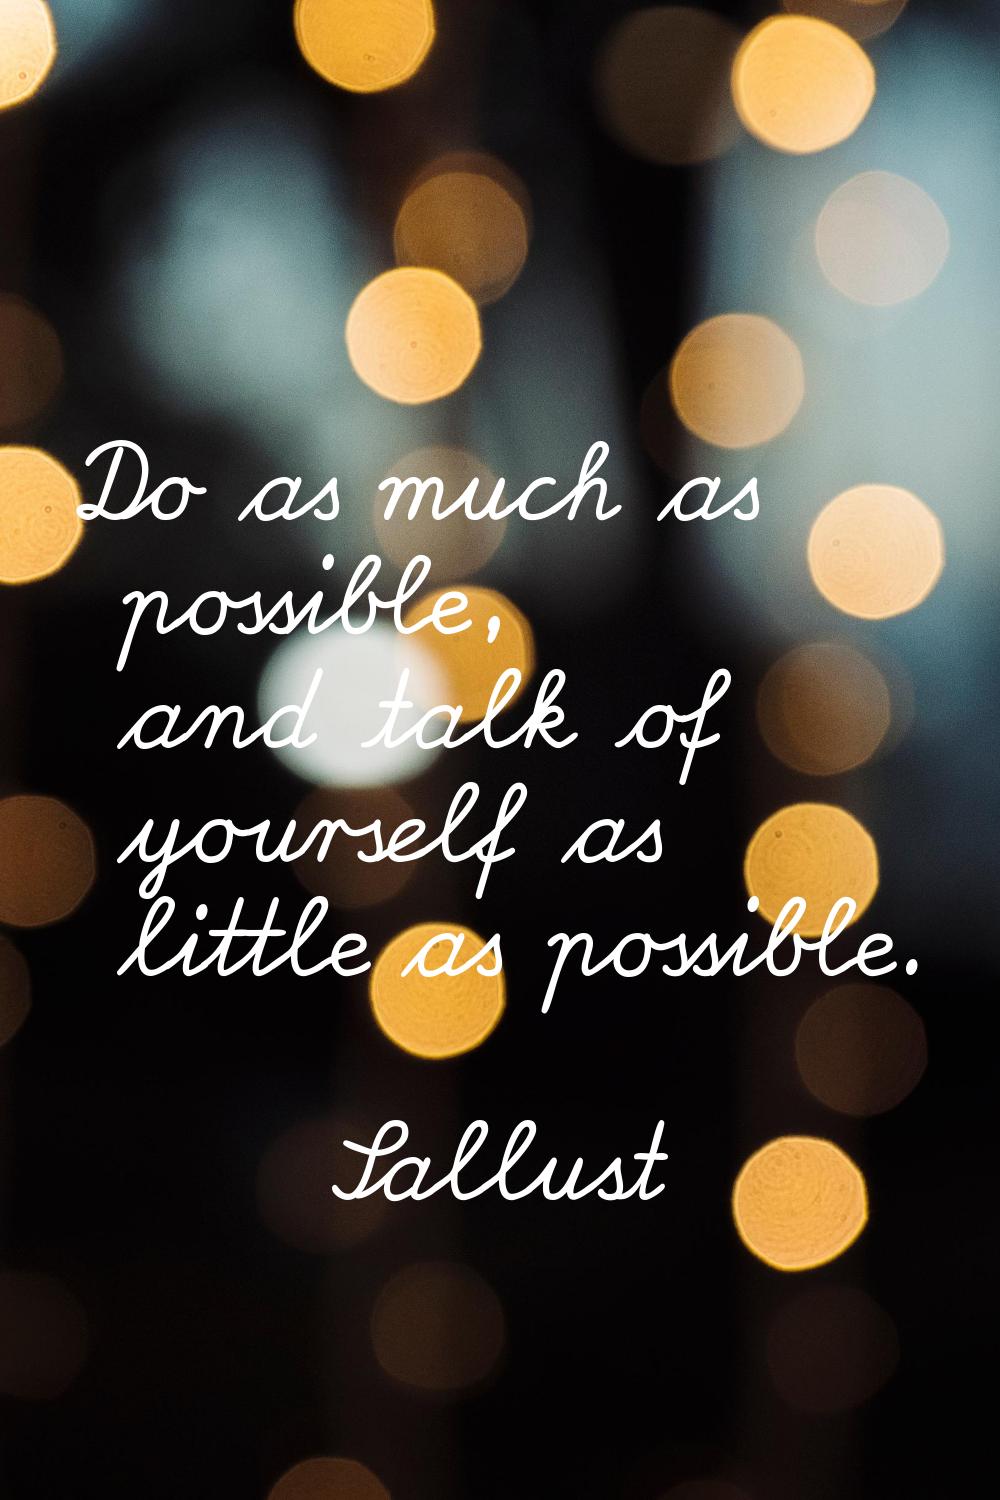 Do as much as possible, and talk of yourself as little as possible.